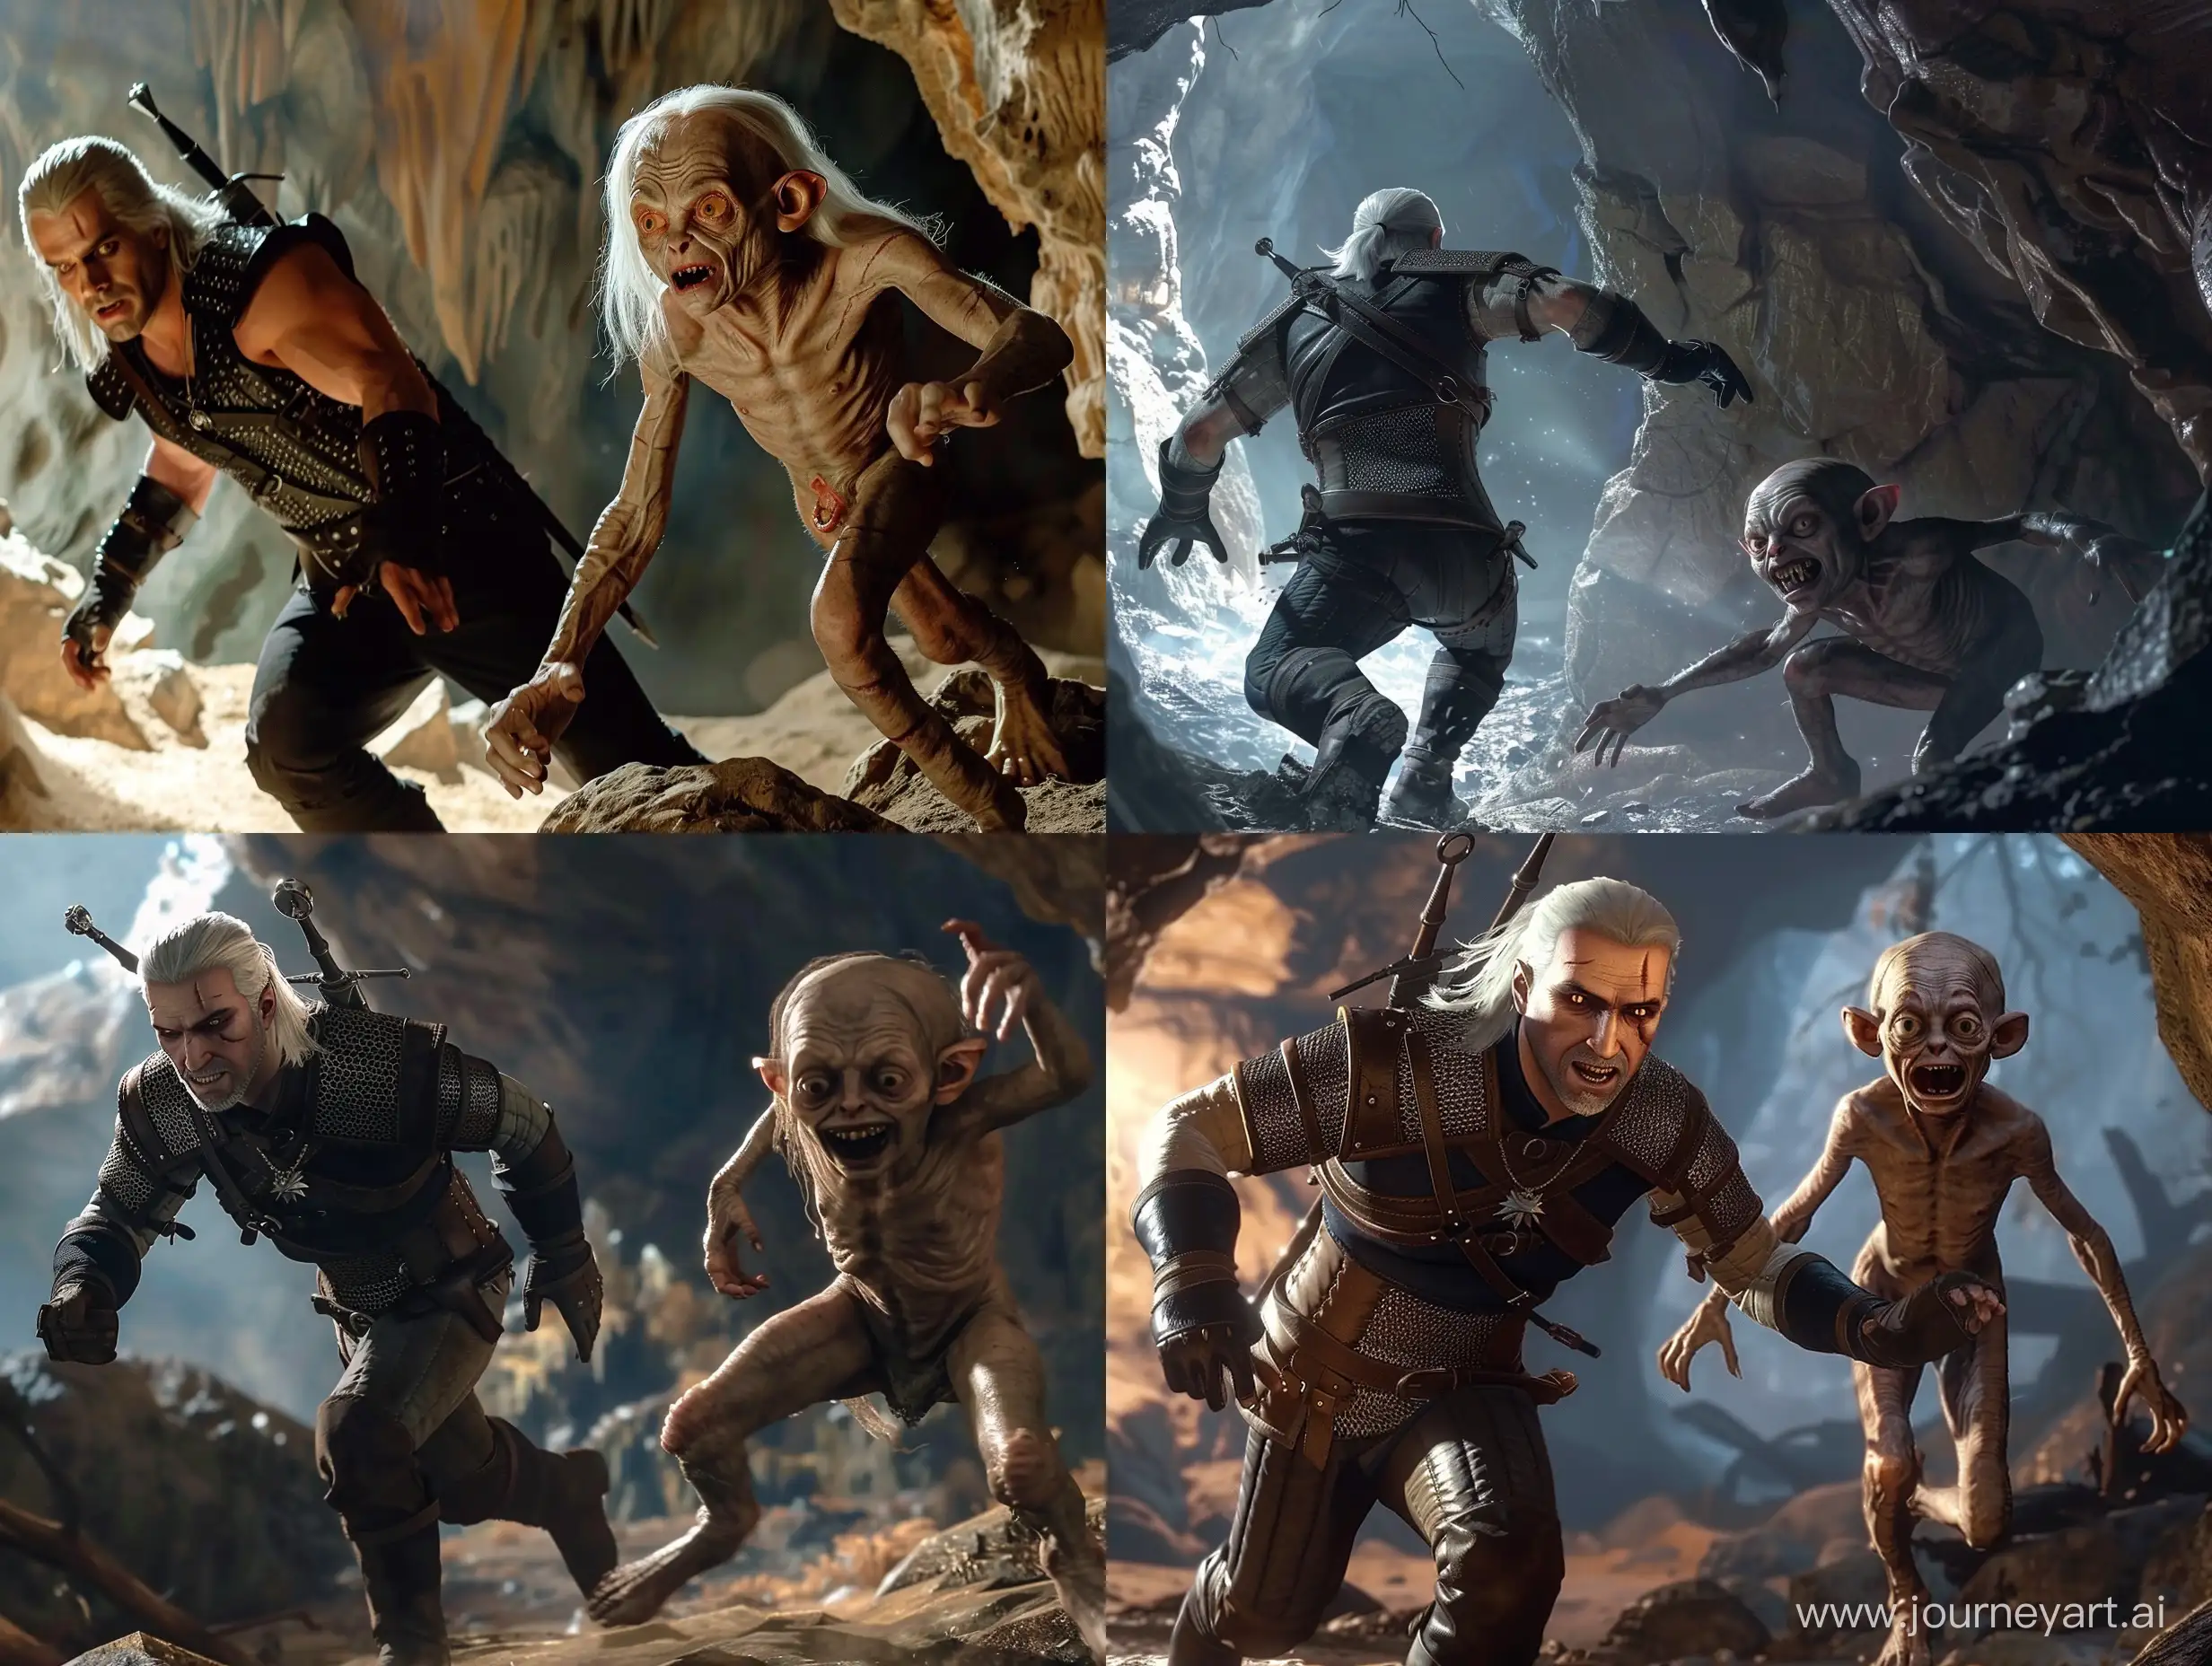 Epic-Chase-Geralt-of-Rivia-Pursues-Gollum-with-the-Precious-Ring-in-a-Witcher-3-Inspired-Scene